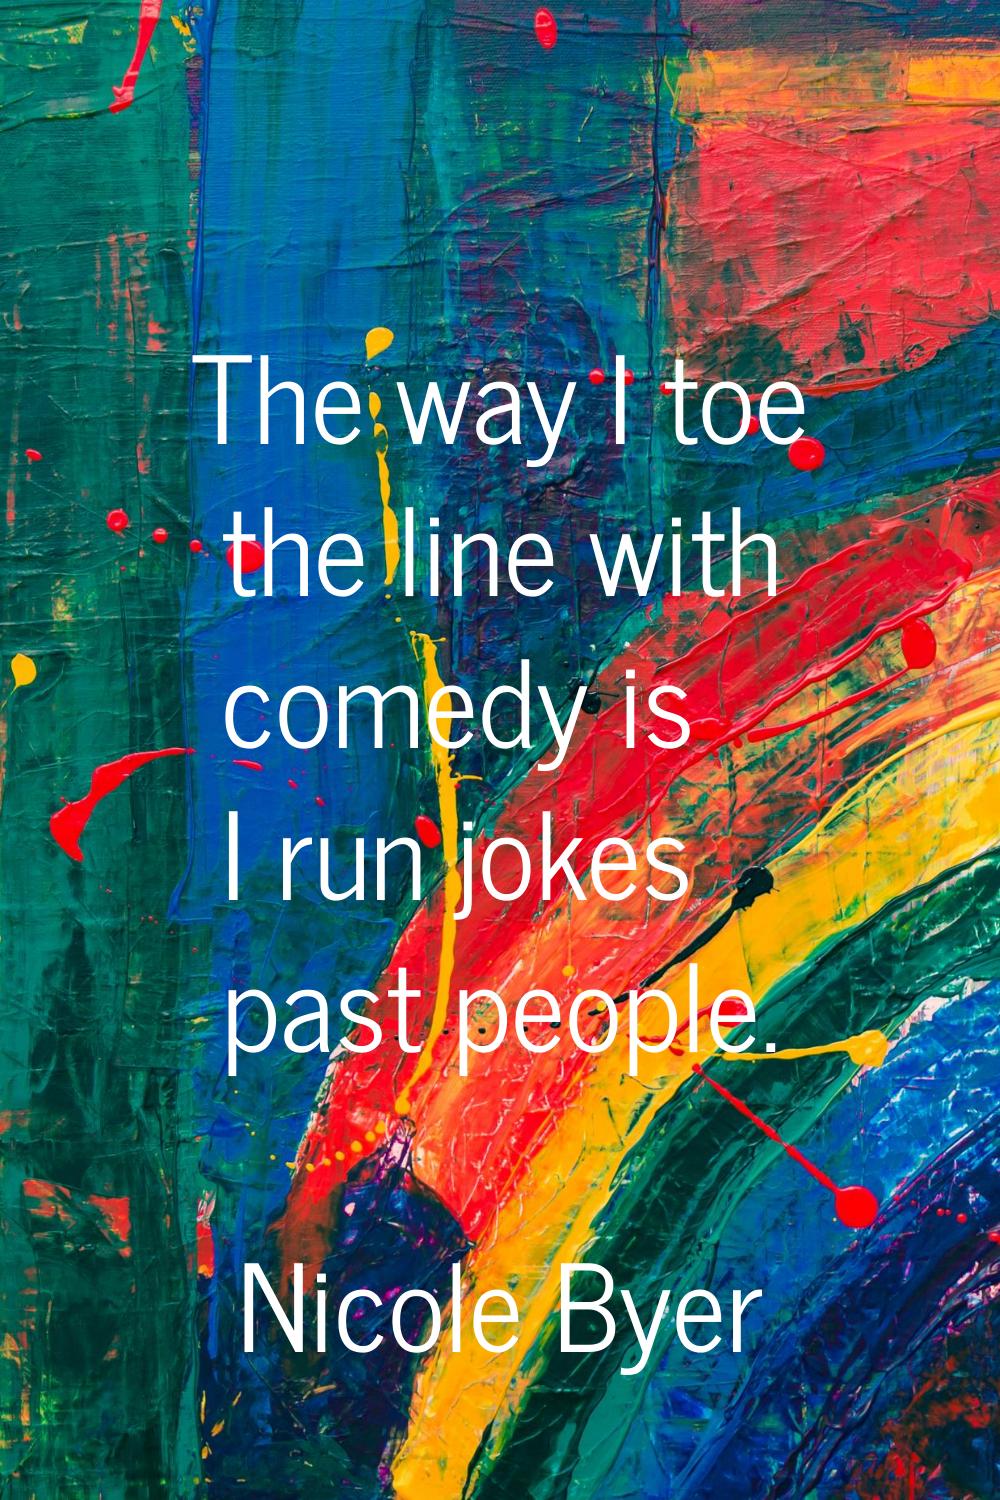 The way I toe the line with comedy is I run jokes past people.